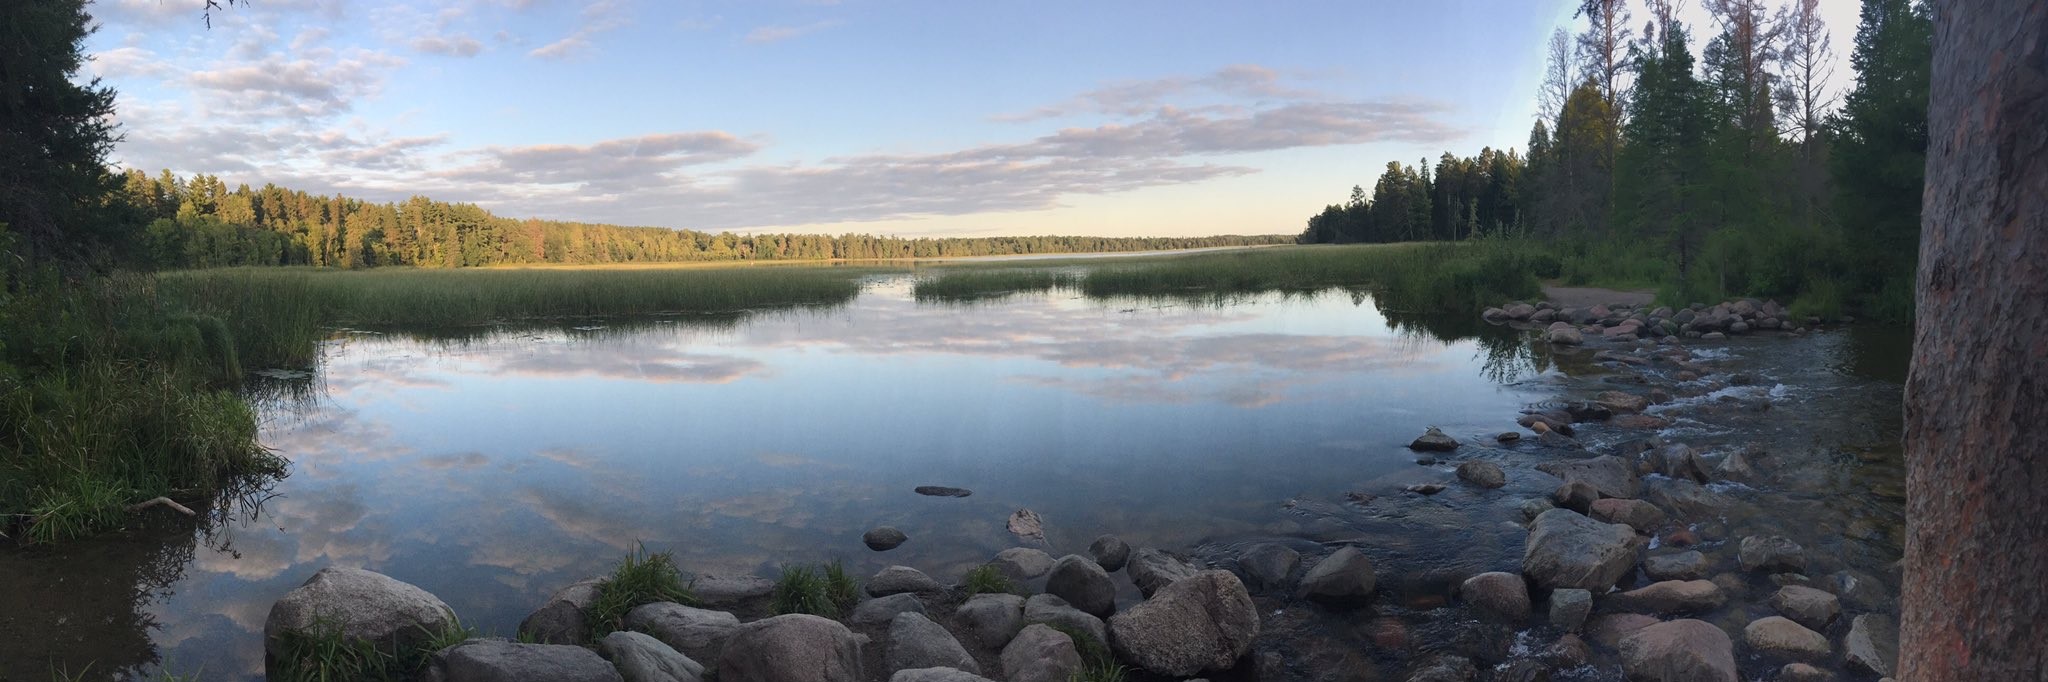 Panorama of Lake Itasca from the Missippippi headwaters monument